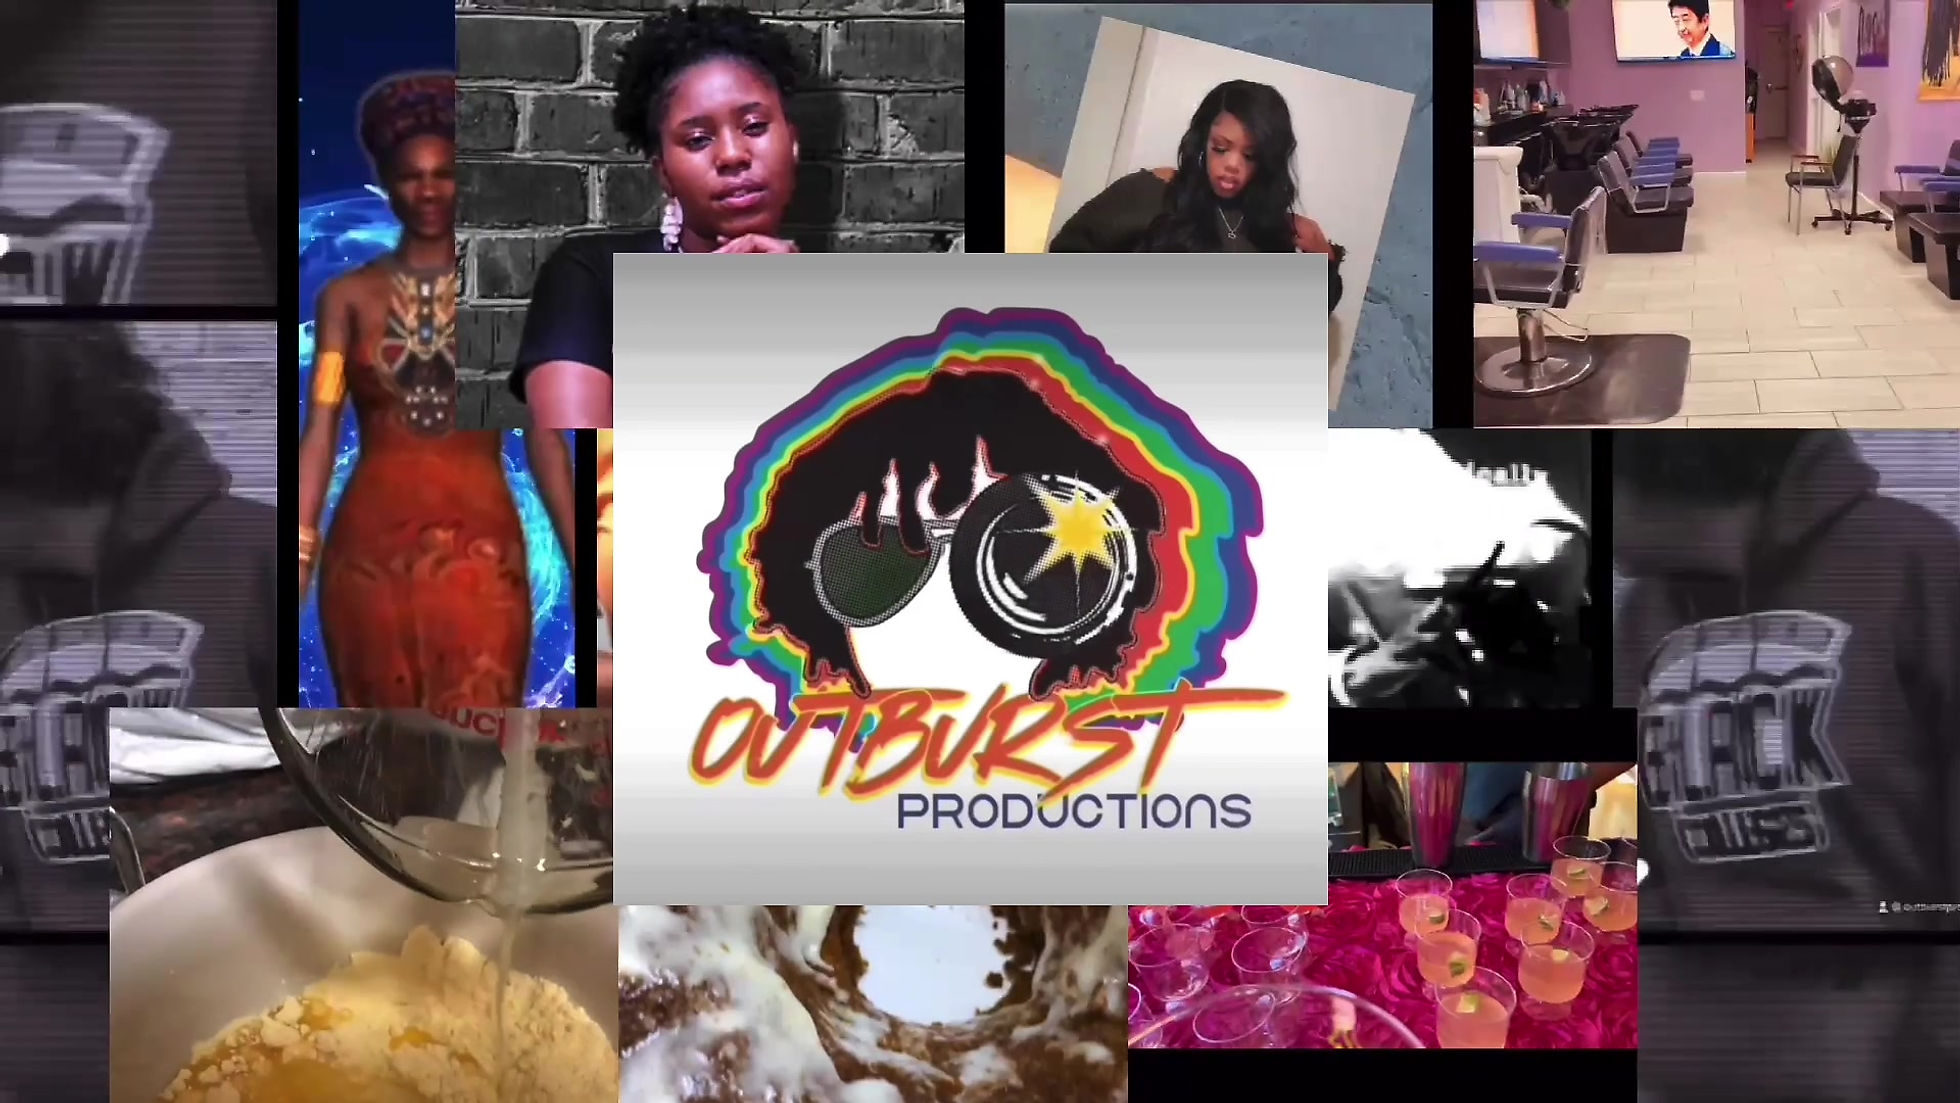 Outburst Productions